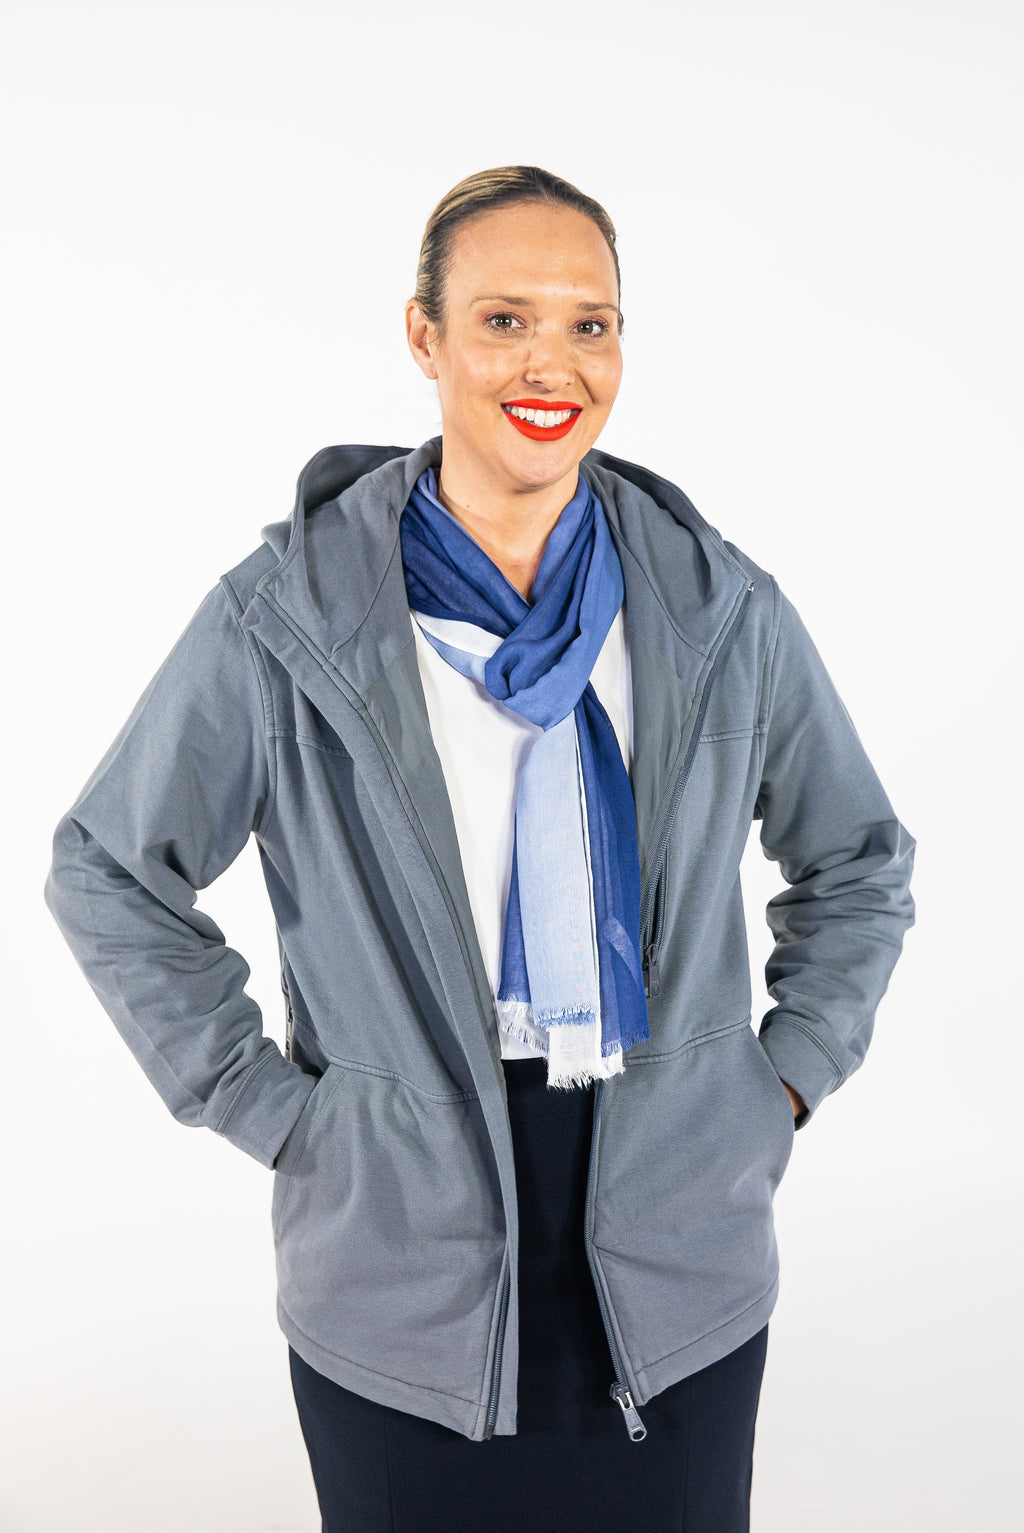 This uniquely designed patent jacket was created to make sleeping easy on long and short haul flights.   This beautiful bamboo blend is soft and comfortable to wear.  Featuring a concealed support structure for holding your head upright during sleep.  The easy-to-use jacket is just the ticket for an inflight sleep.